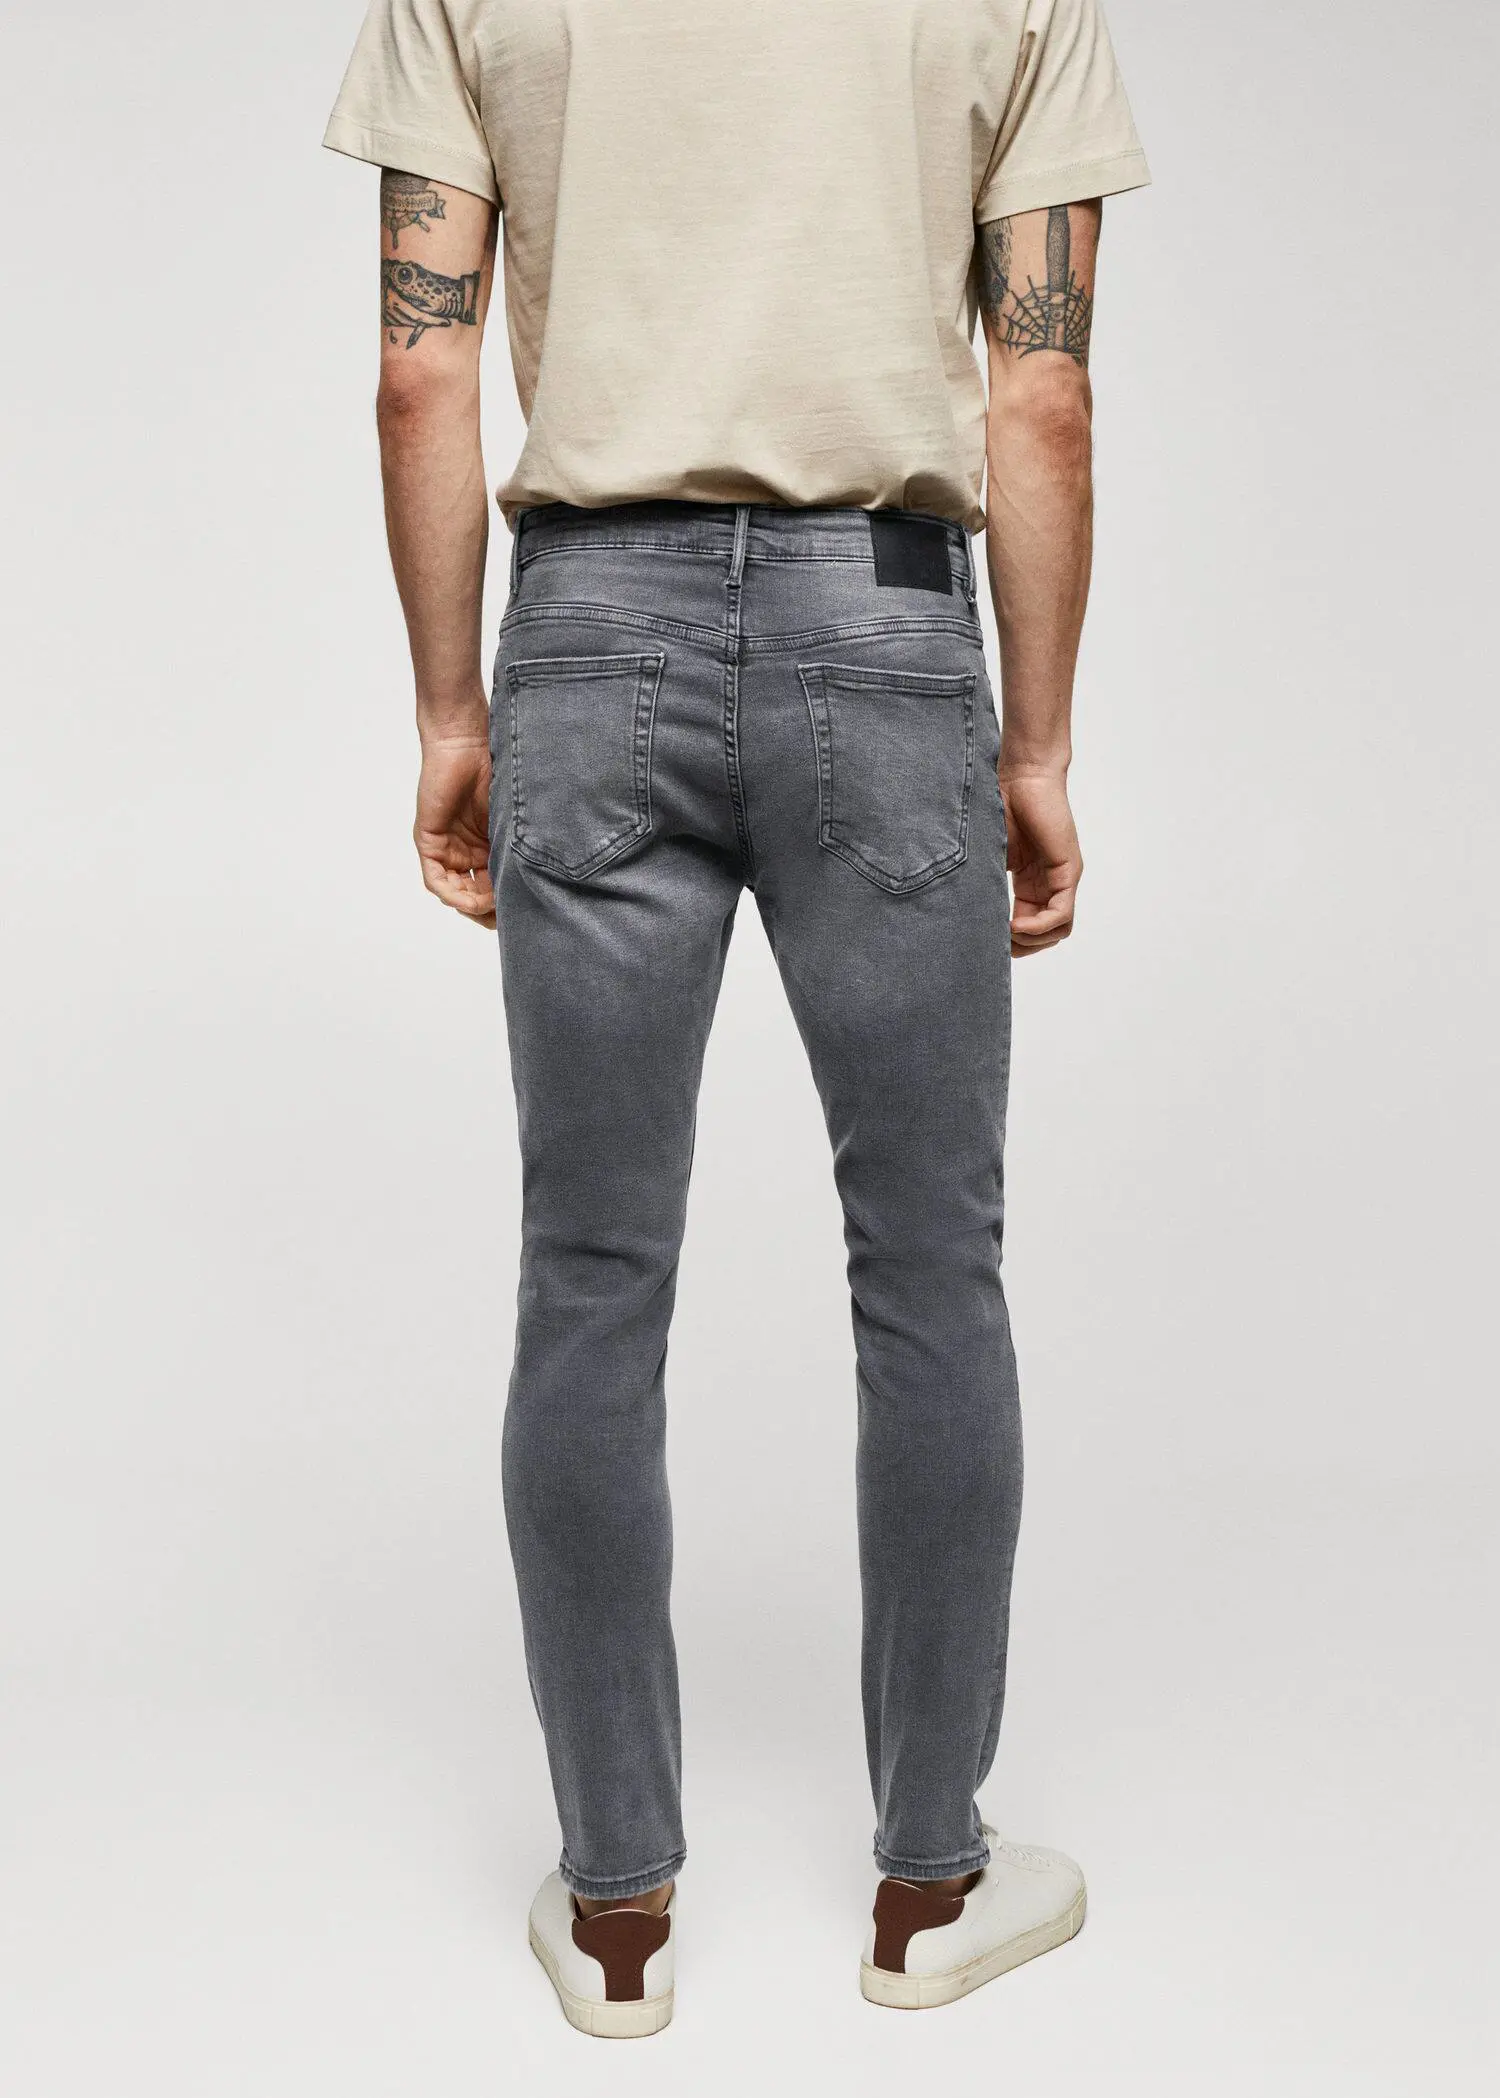 Mango Jude skinny-fit jeans. a man wearing grey jeans and a beige shirt. 